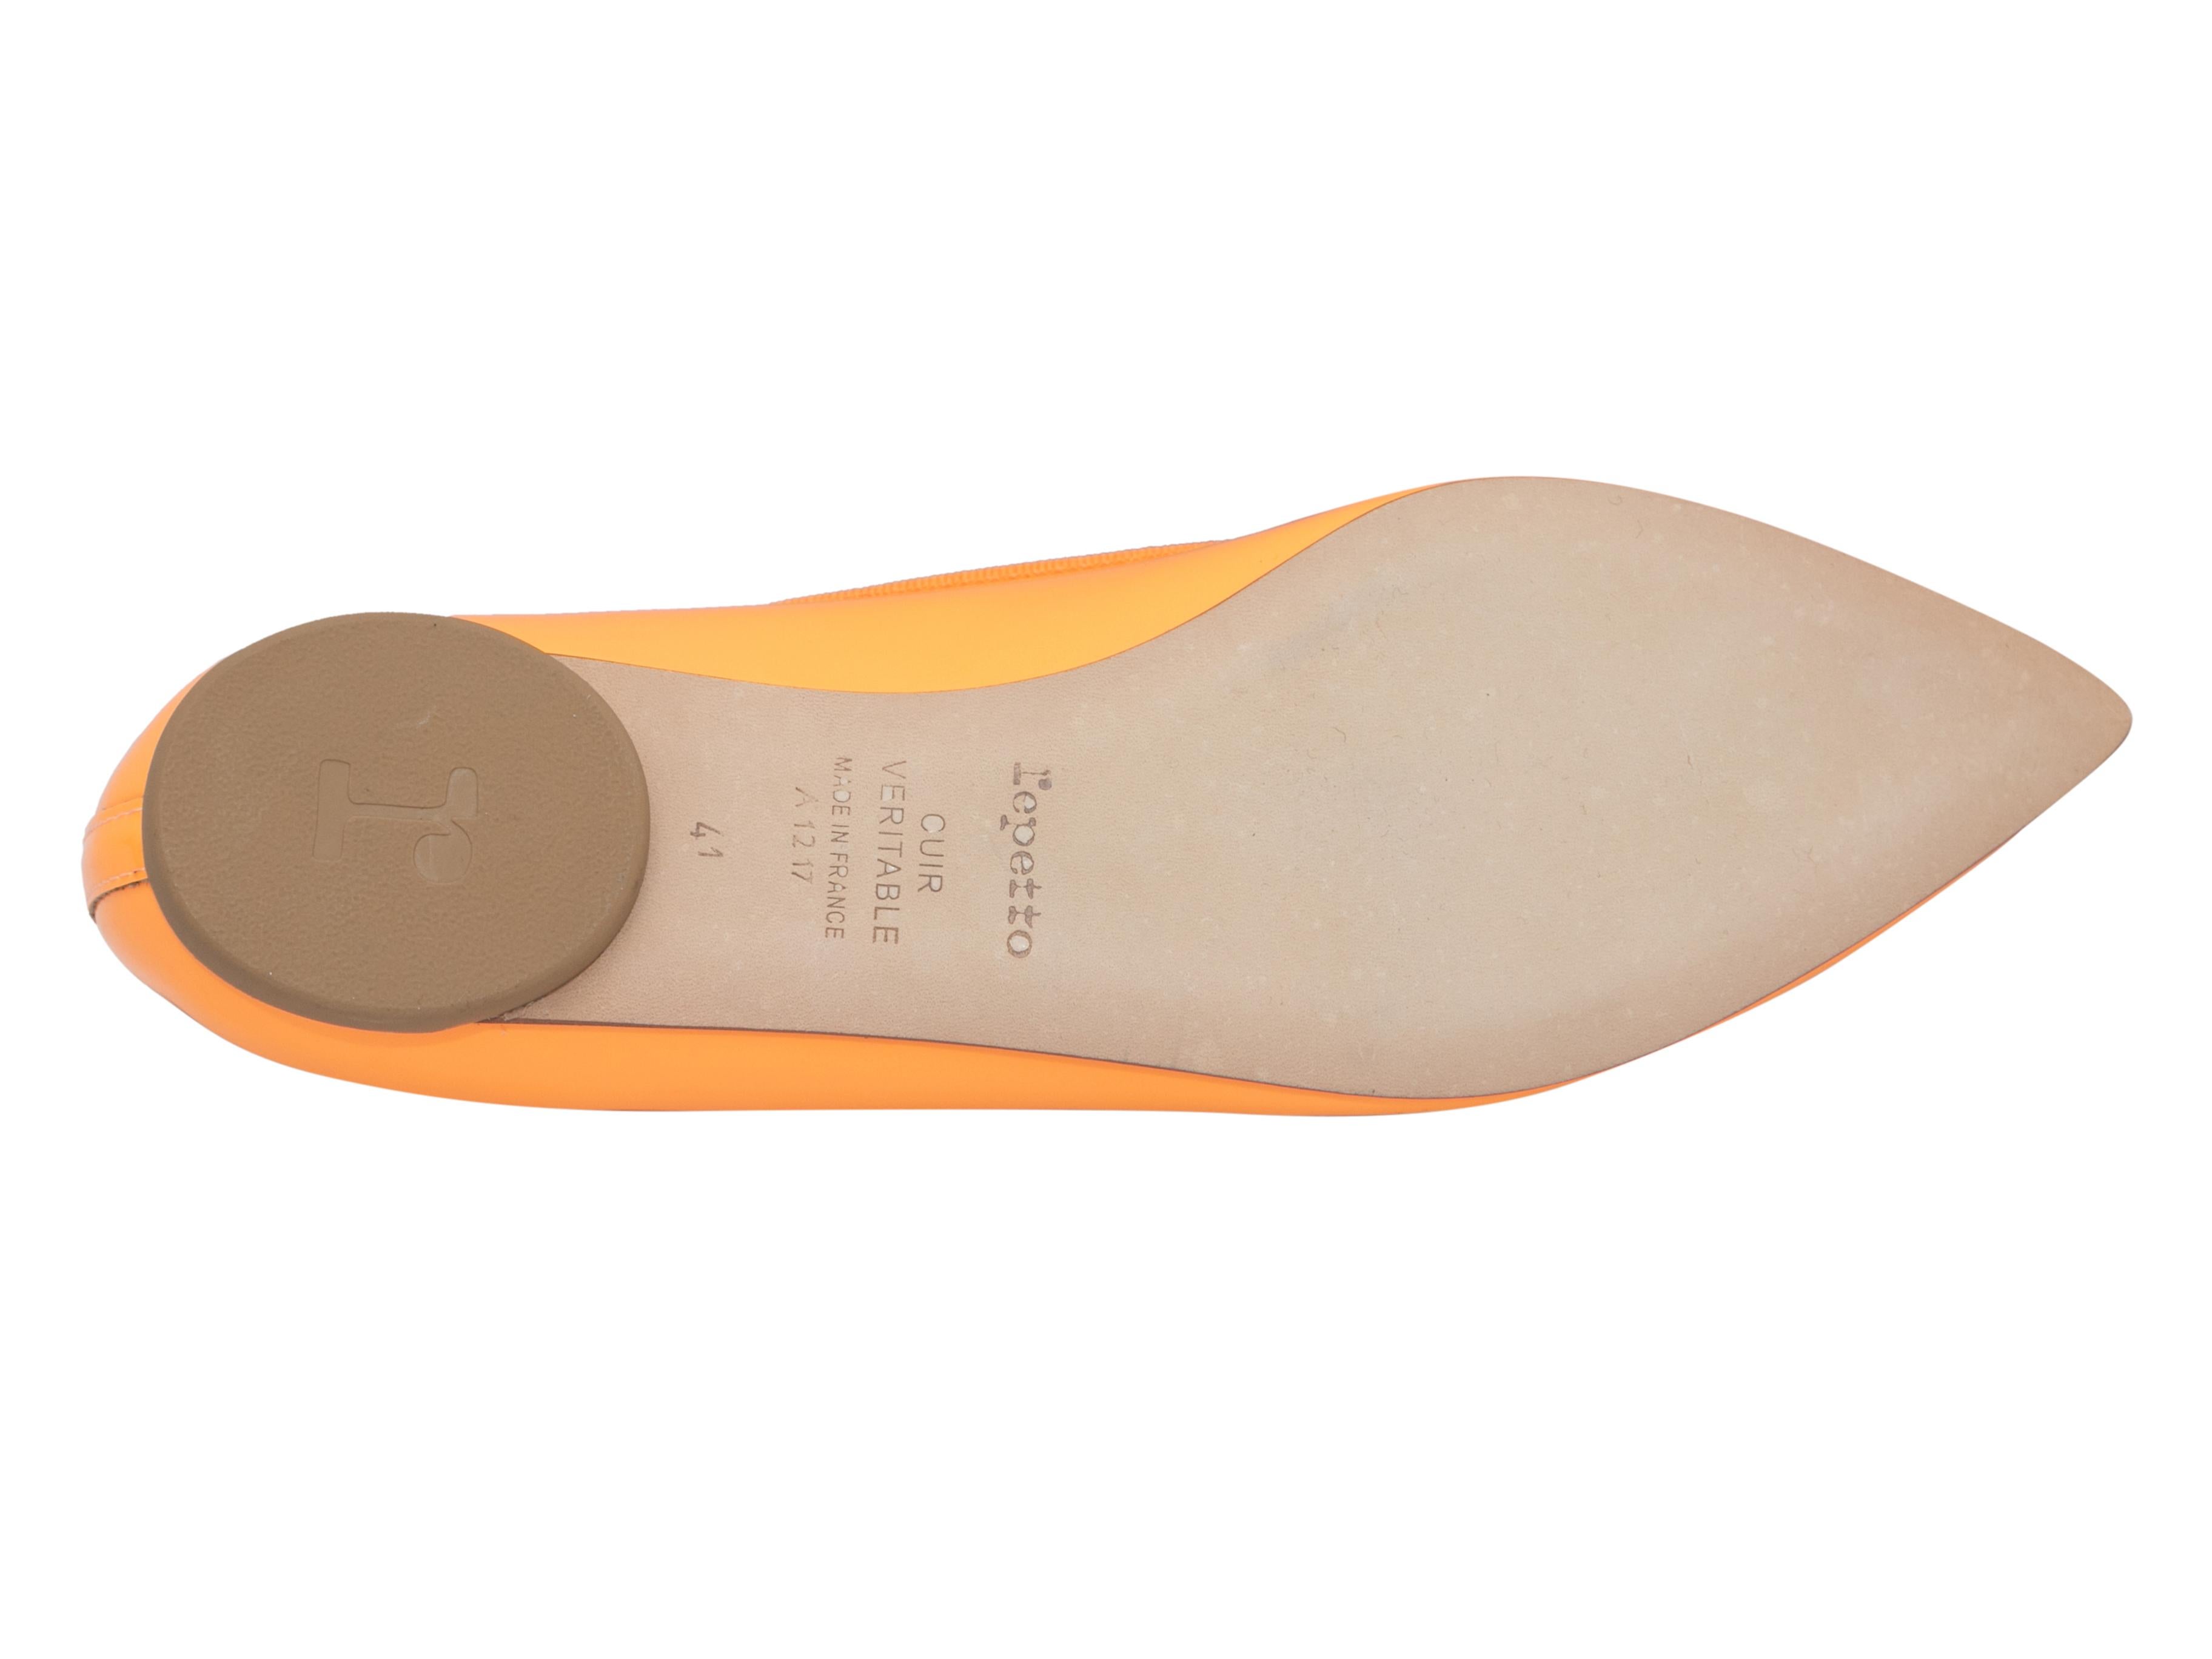 Marigold Repetto Patent Pointed-Toe Flats Size 41 For Sale 1